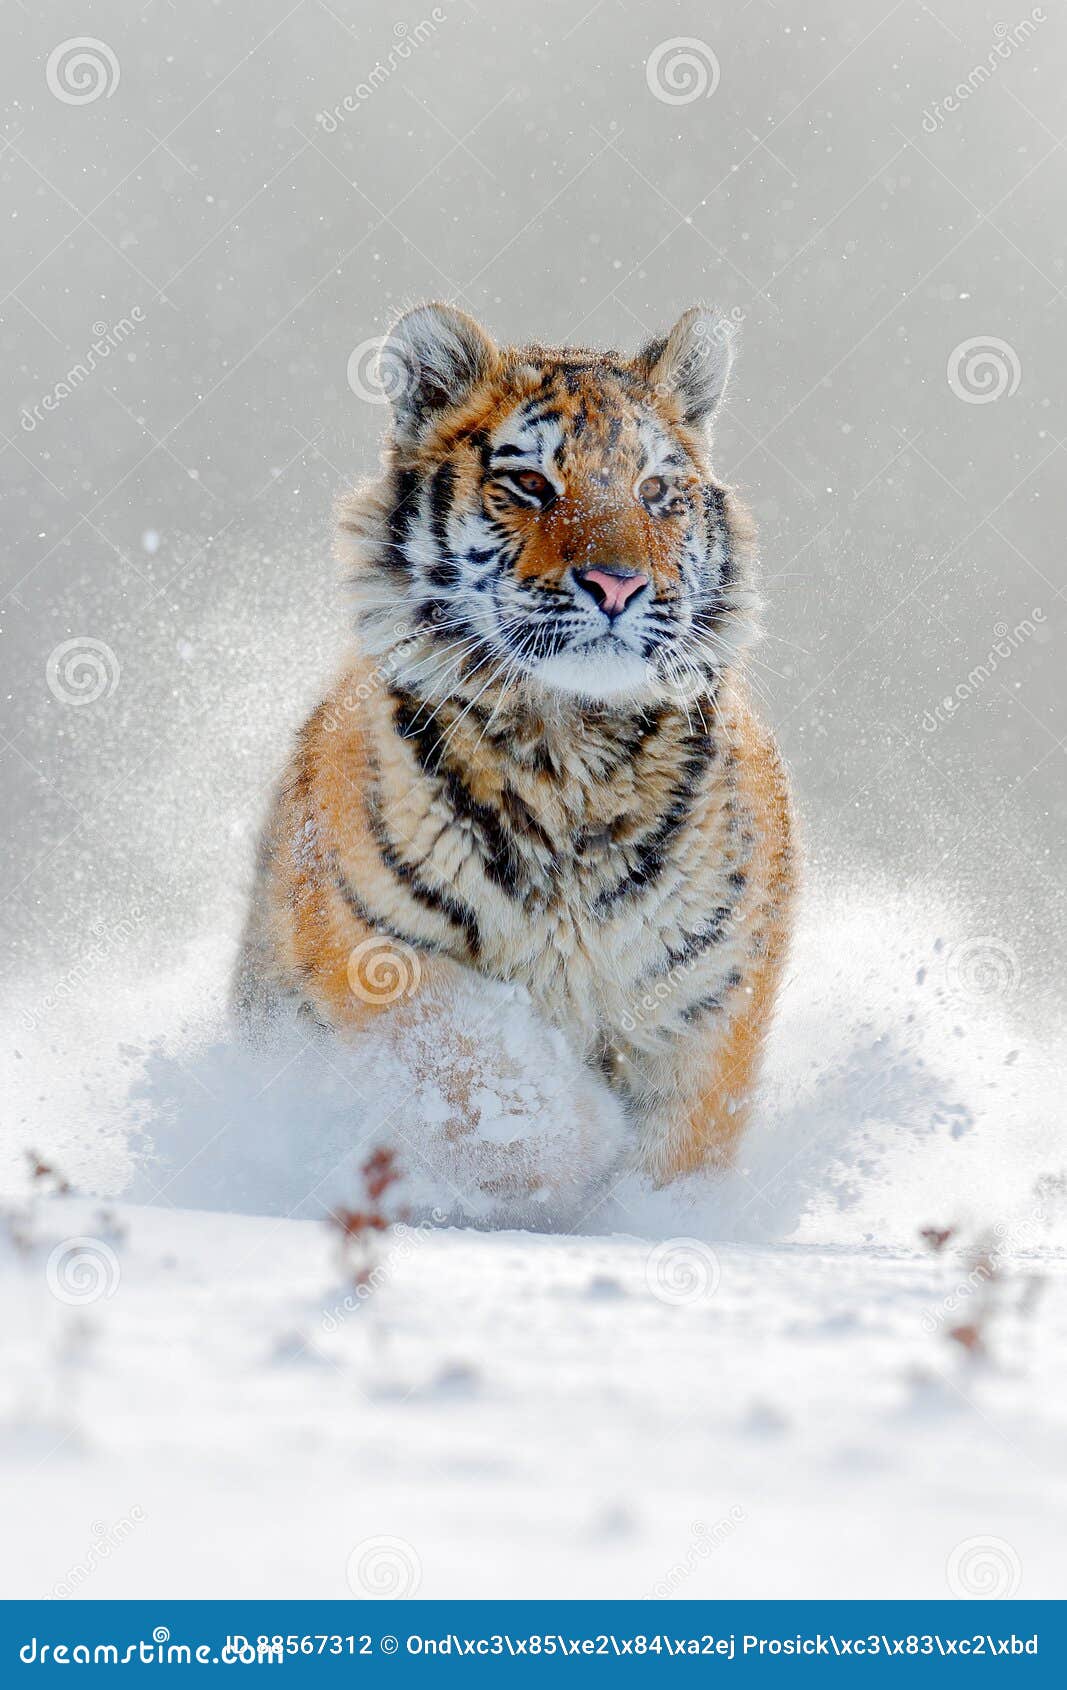 amur tiger running in the snow. action wildlife scene with danger animal. cold winter in tajga, russia. snowflake with beautiful s